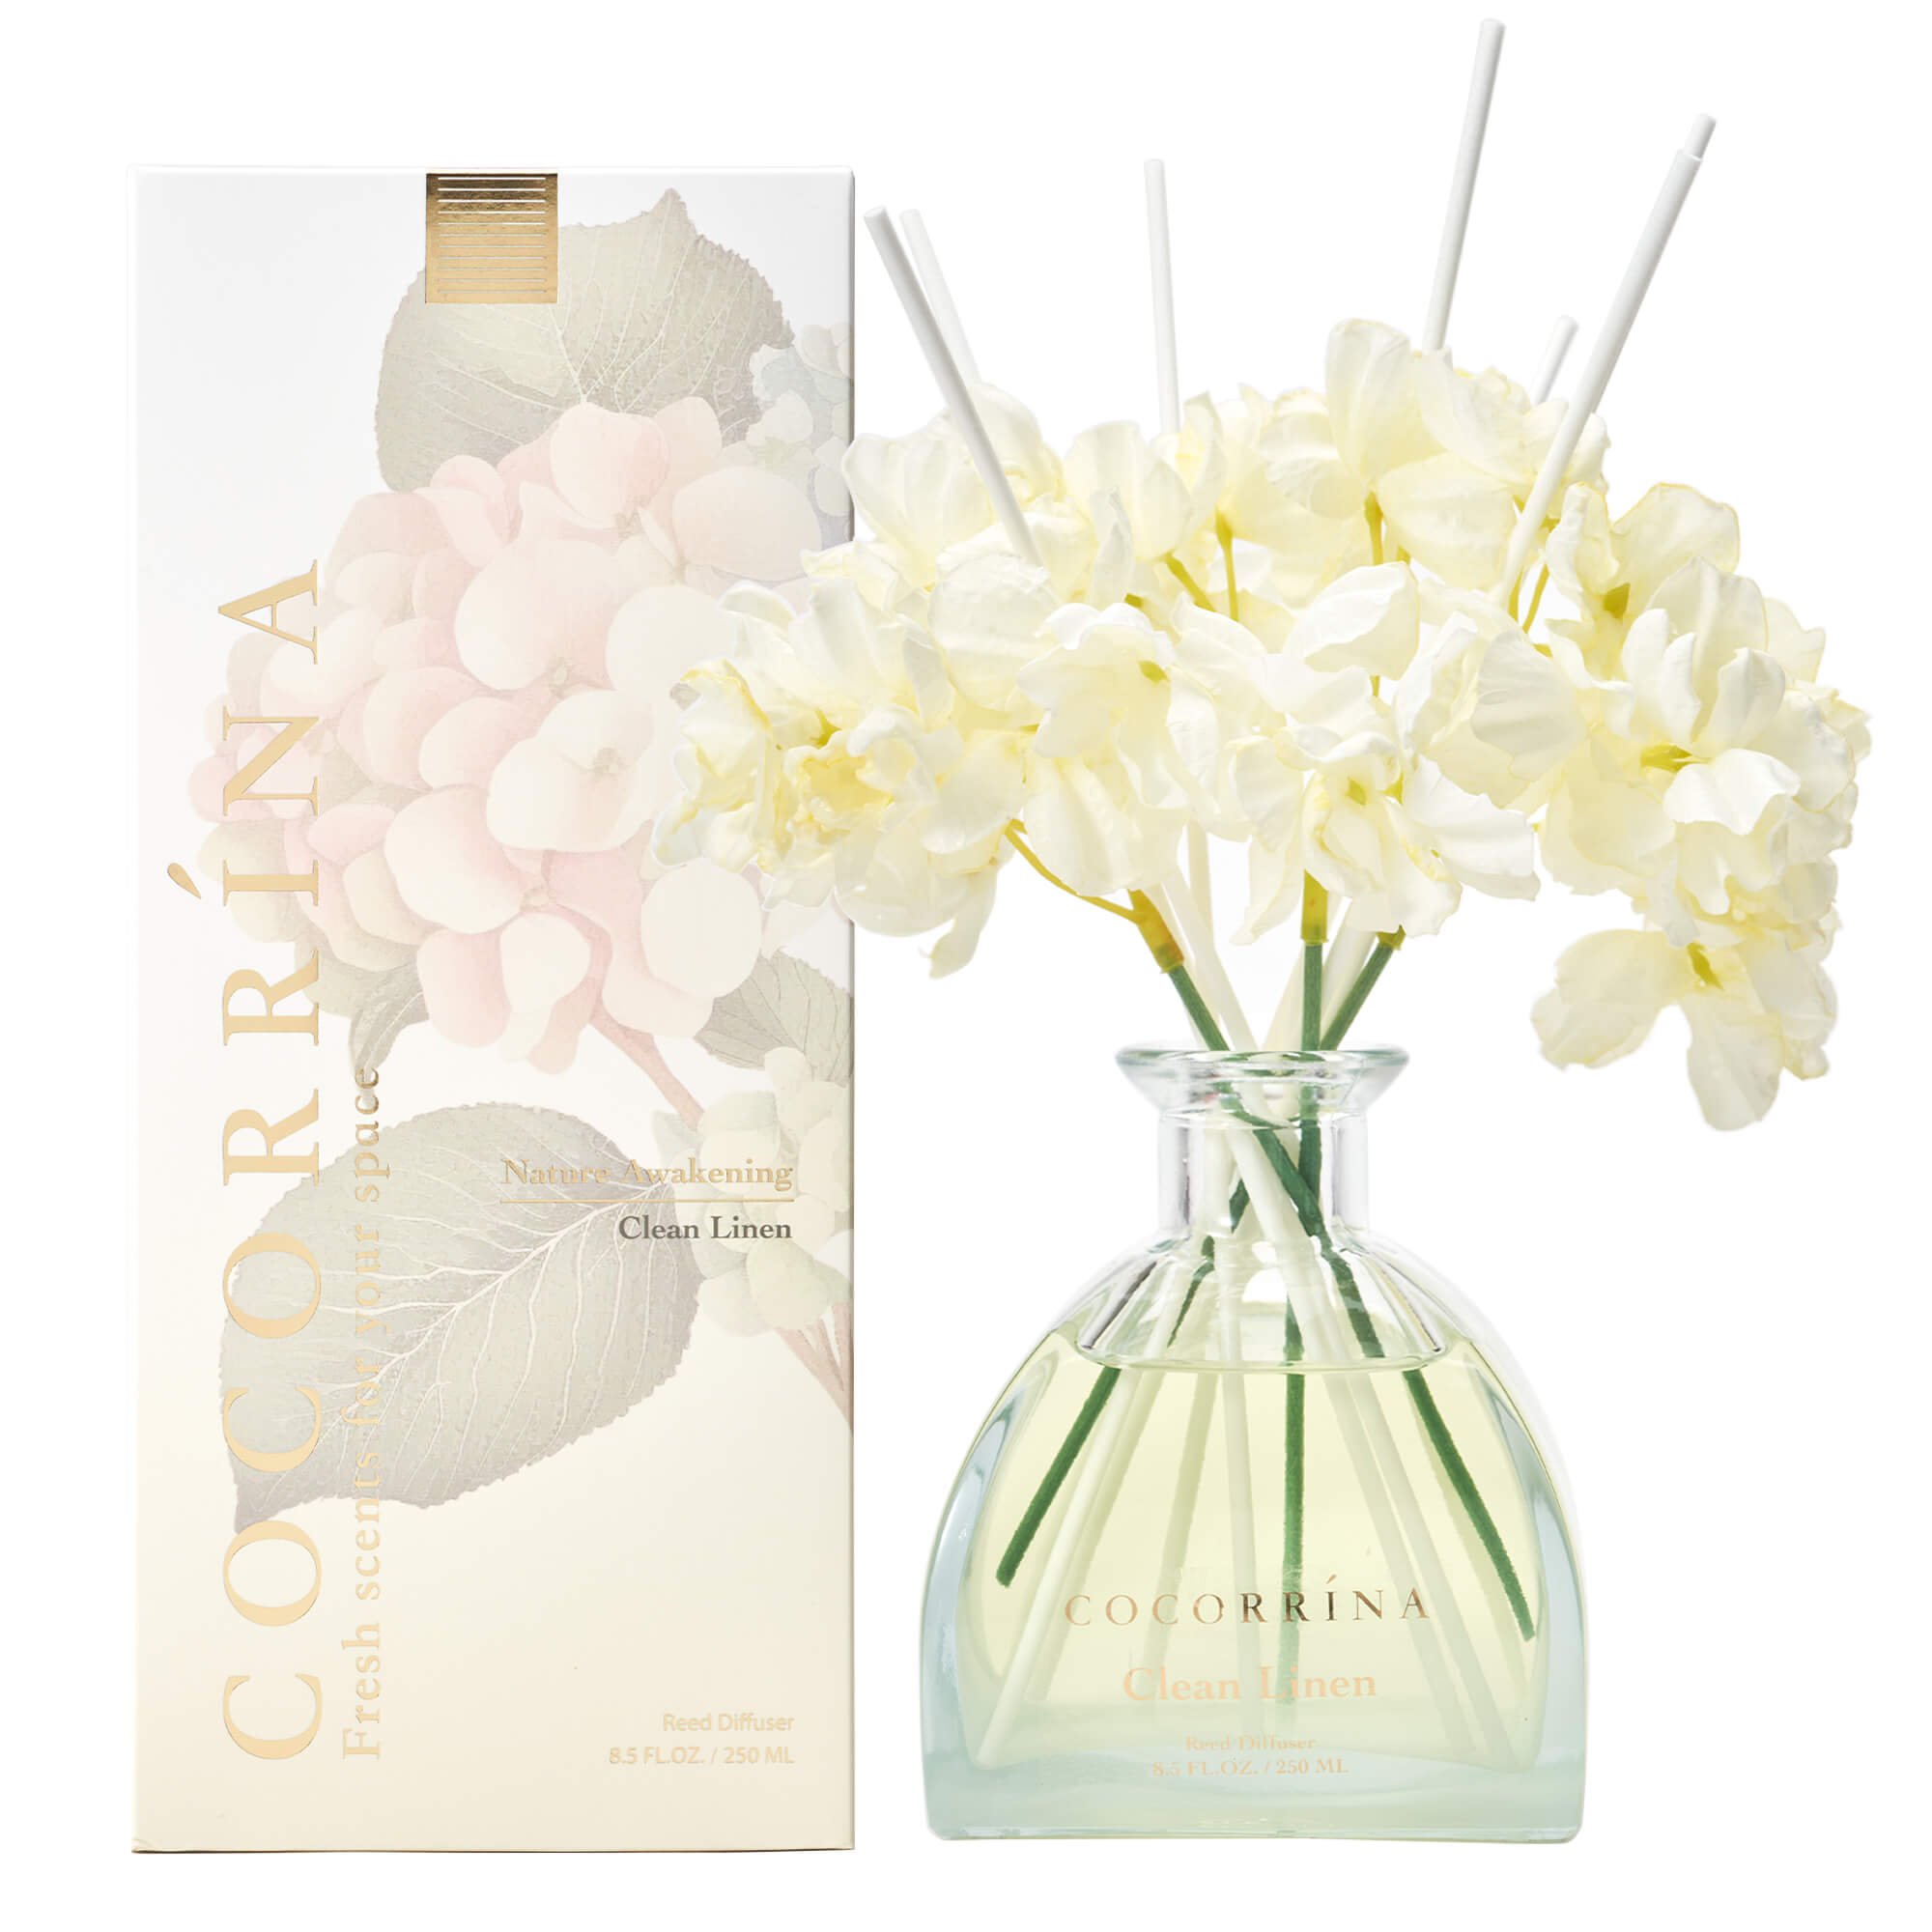 COCORRÍNA Clean Linen Simple Luxe Reed Diffuser Set